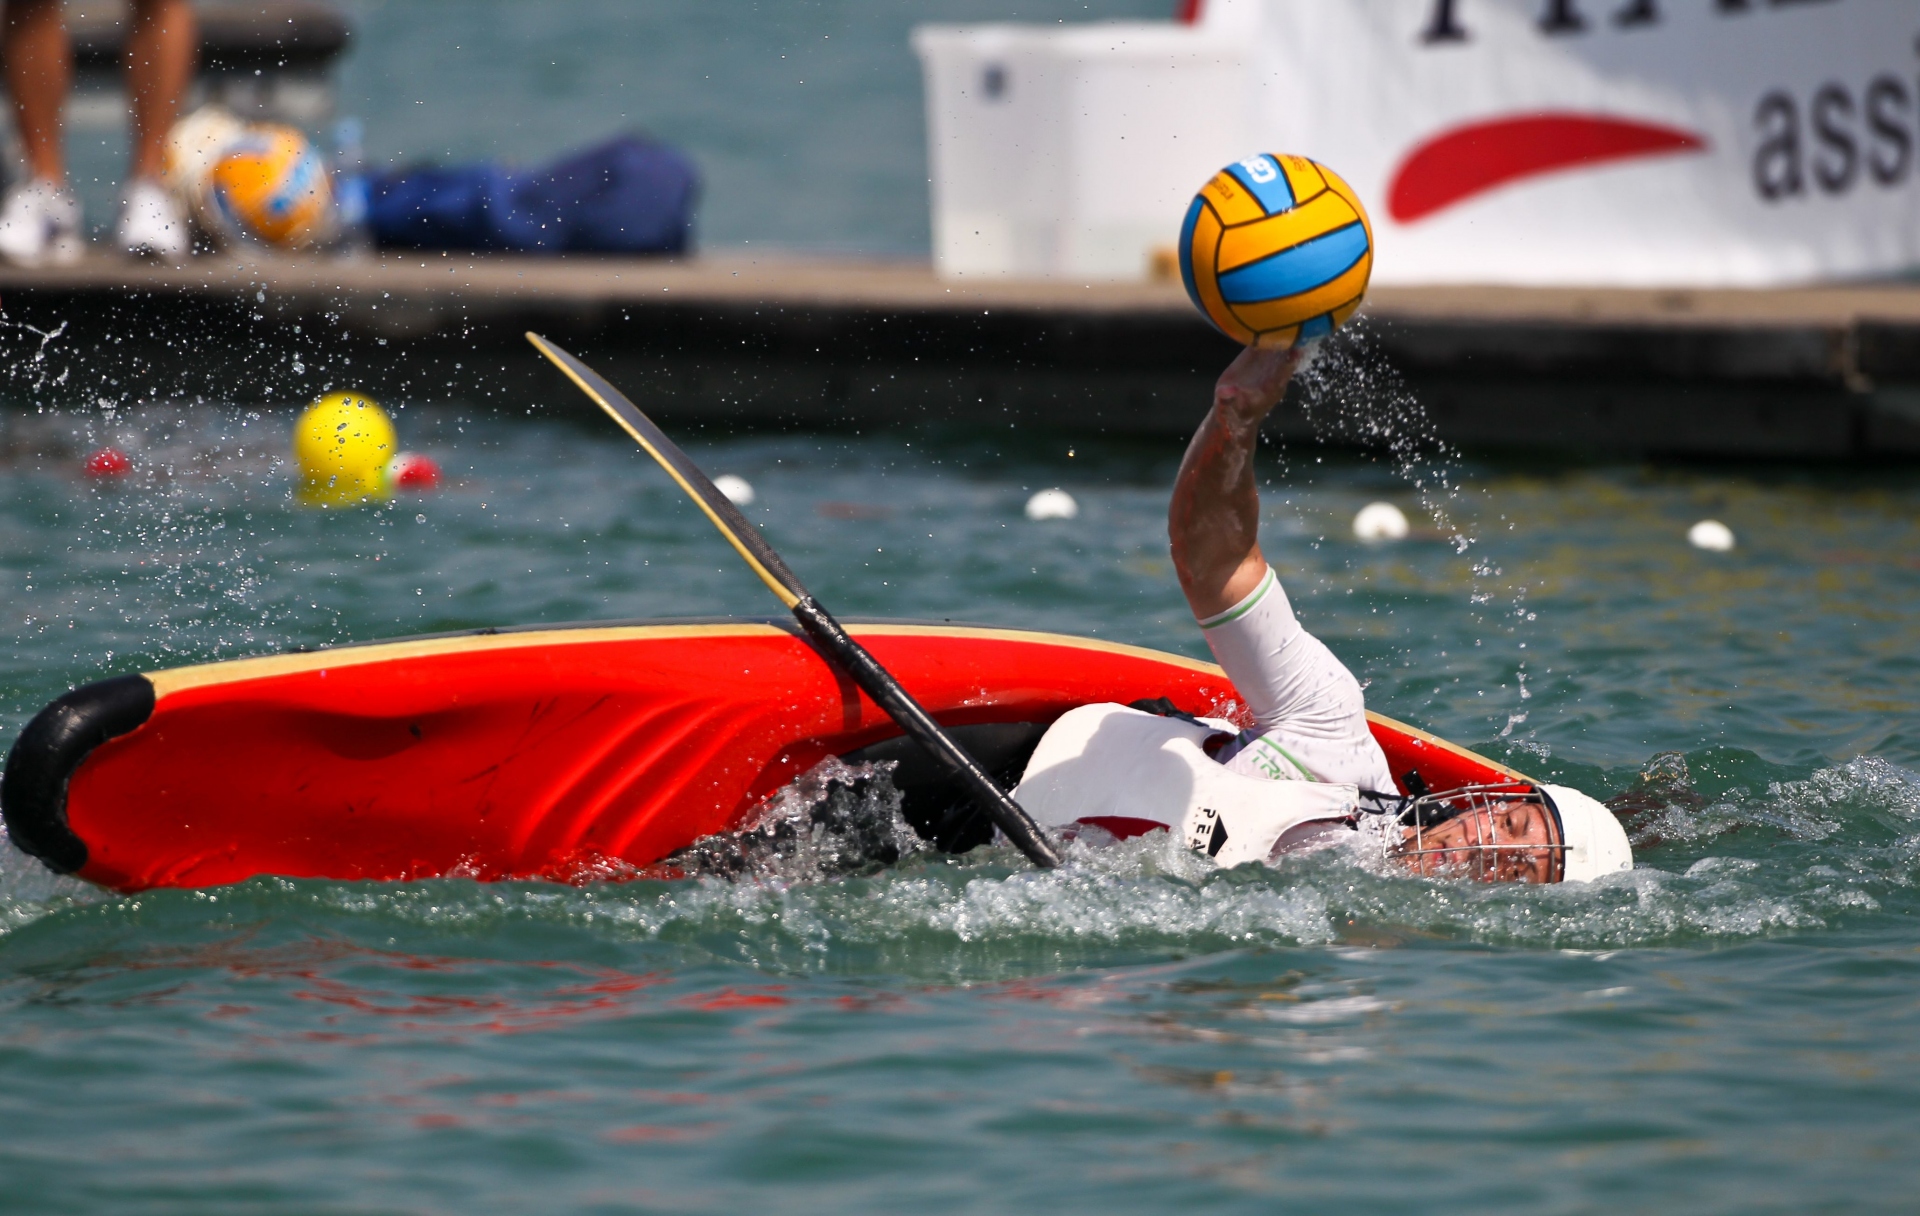 World Games attract world's best canoe polo teams | ICF 